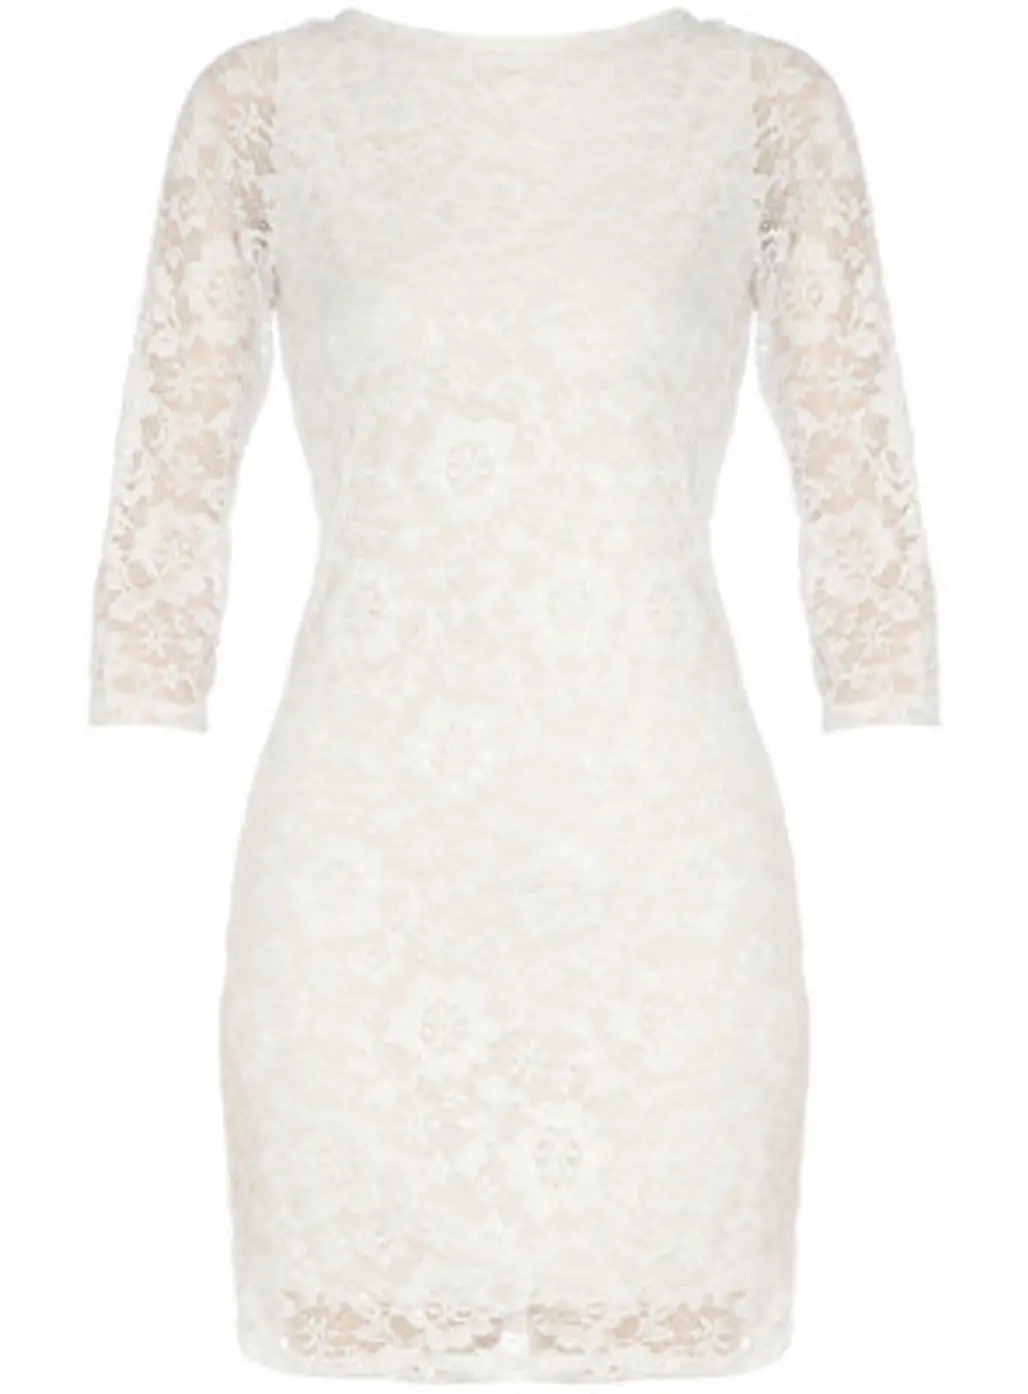 Dorothy Perkins Cream Backless Lace Dress